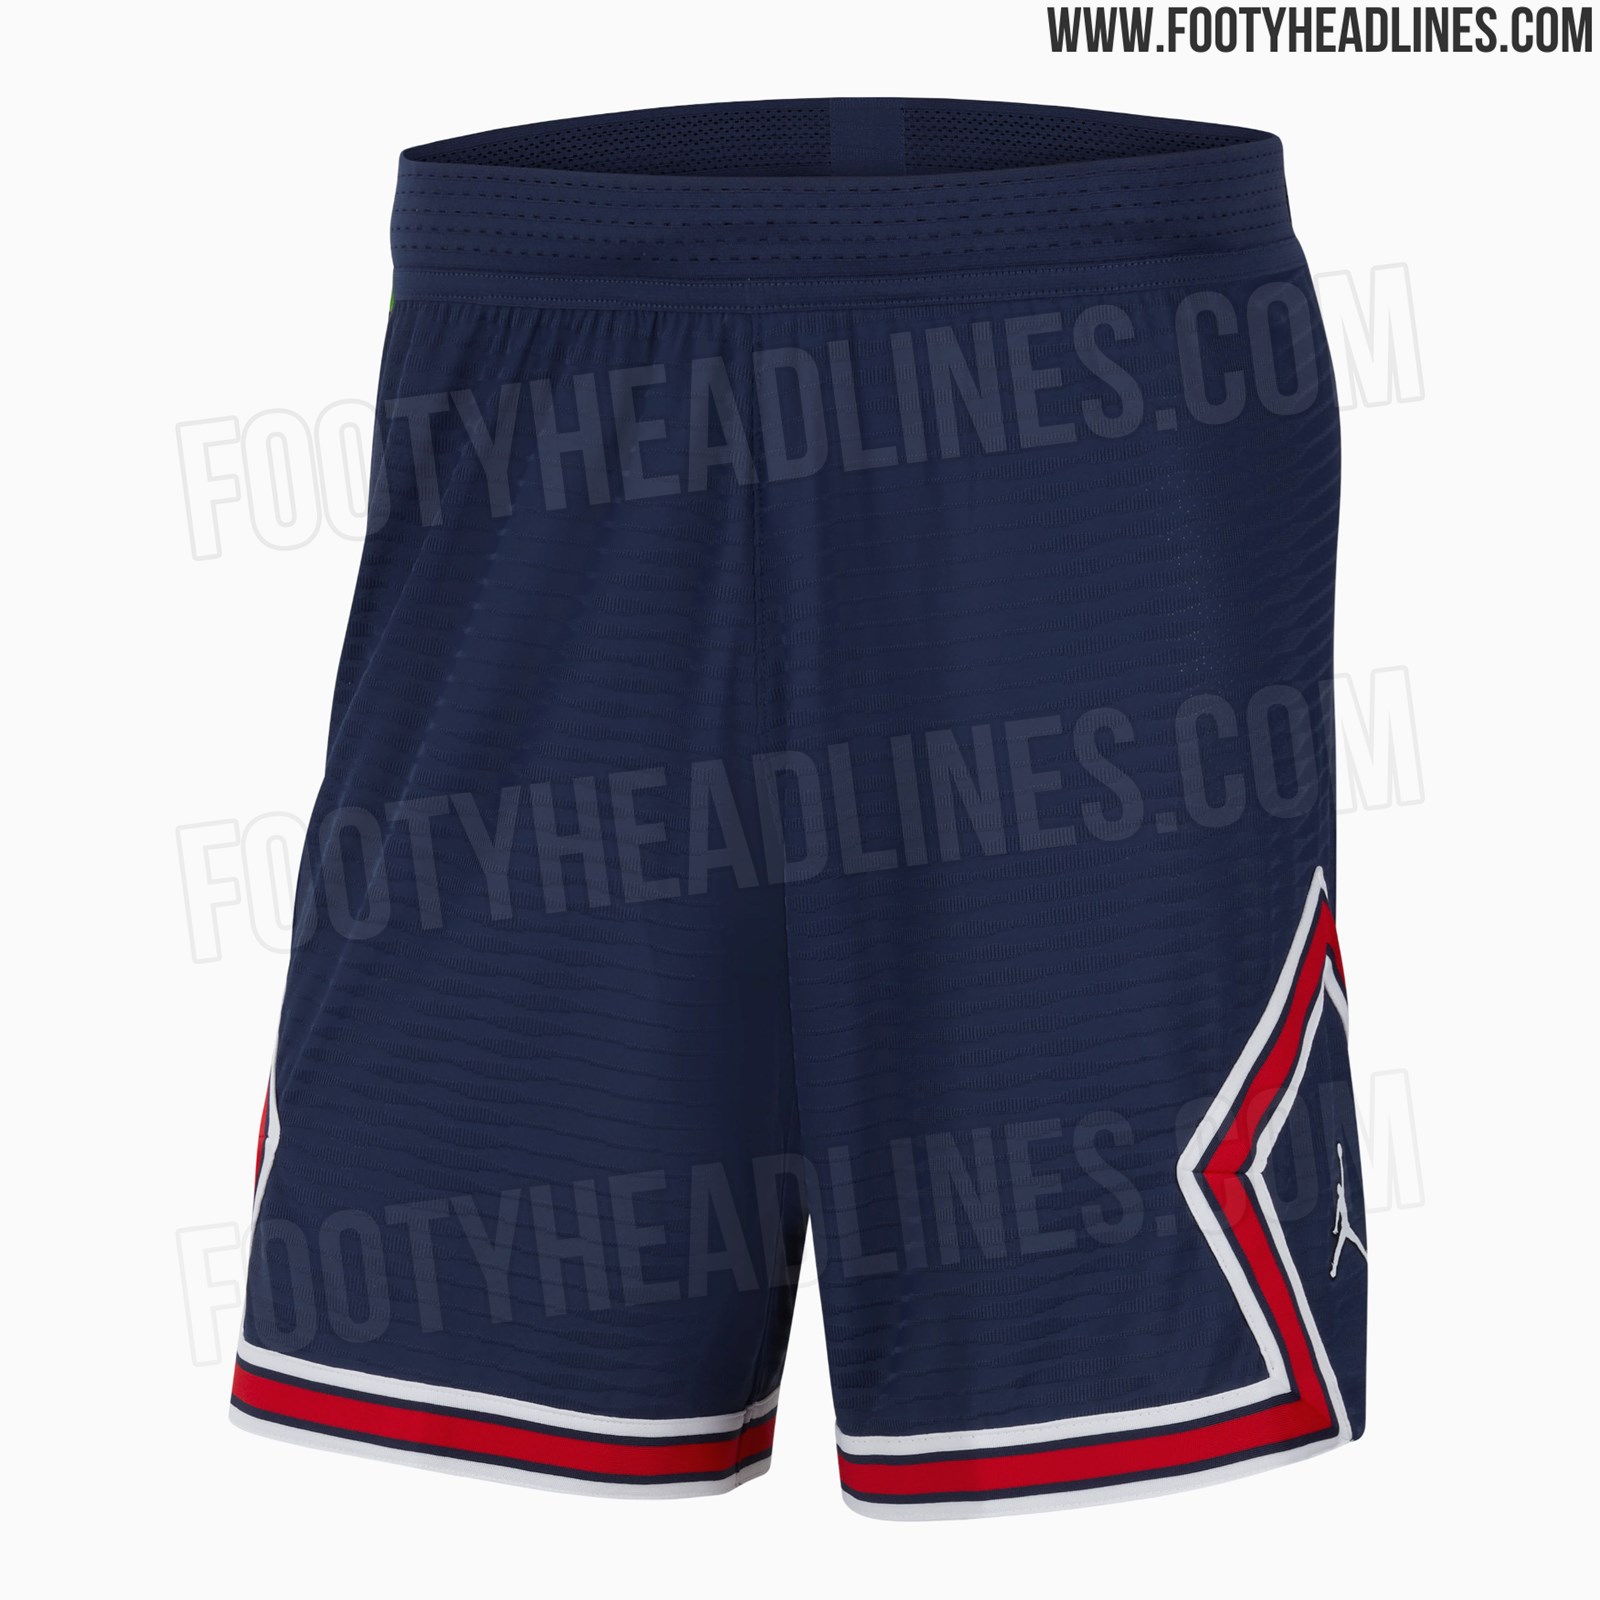 Is the PSG 21-22 Fourth Really the Last Made by Jordan? - Footy Headlines